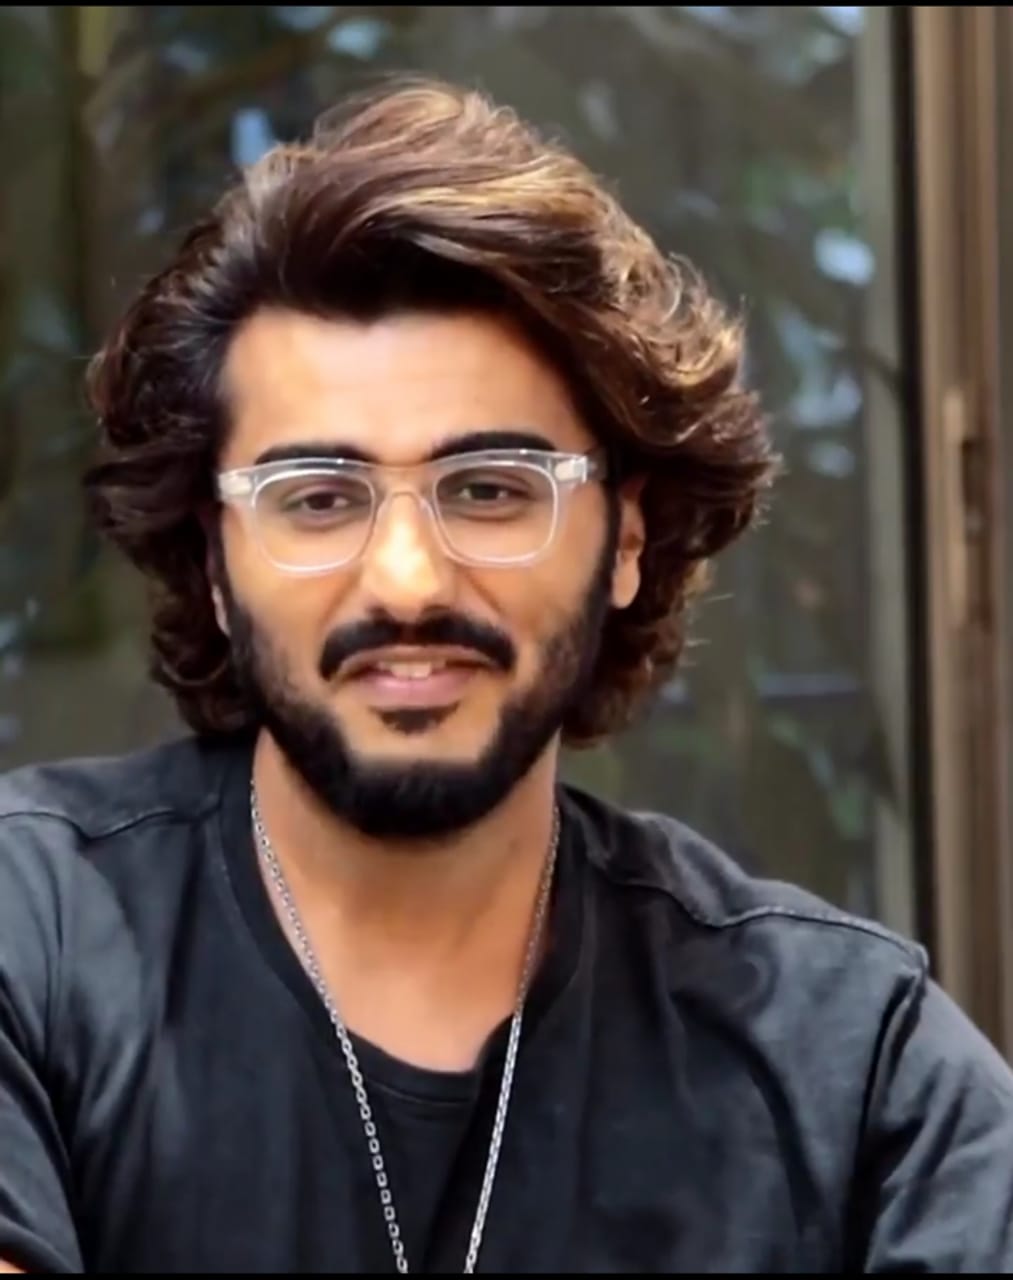 Arjun Kapoor's New Long Hair & Stylish Spectacle Look Is Every Man's  Lockdown Goal | IWMBuzz